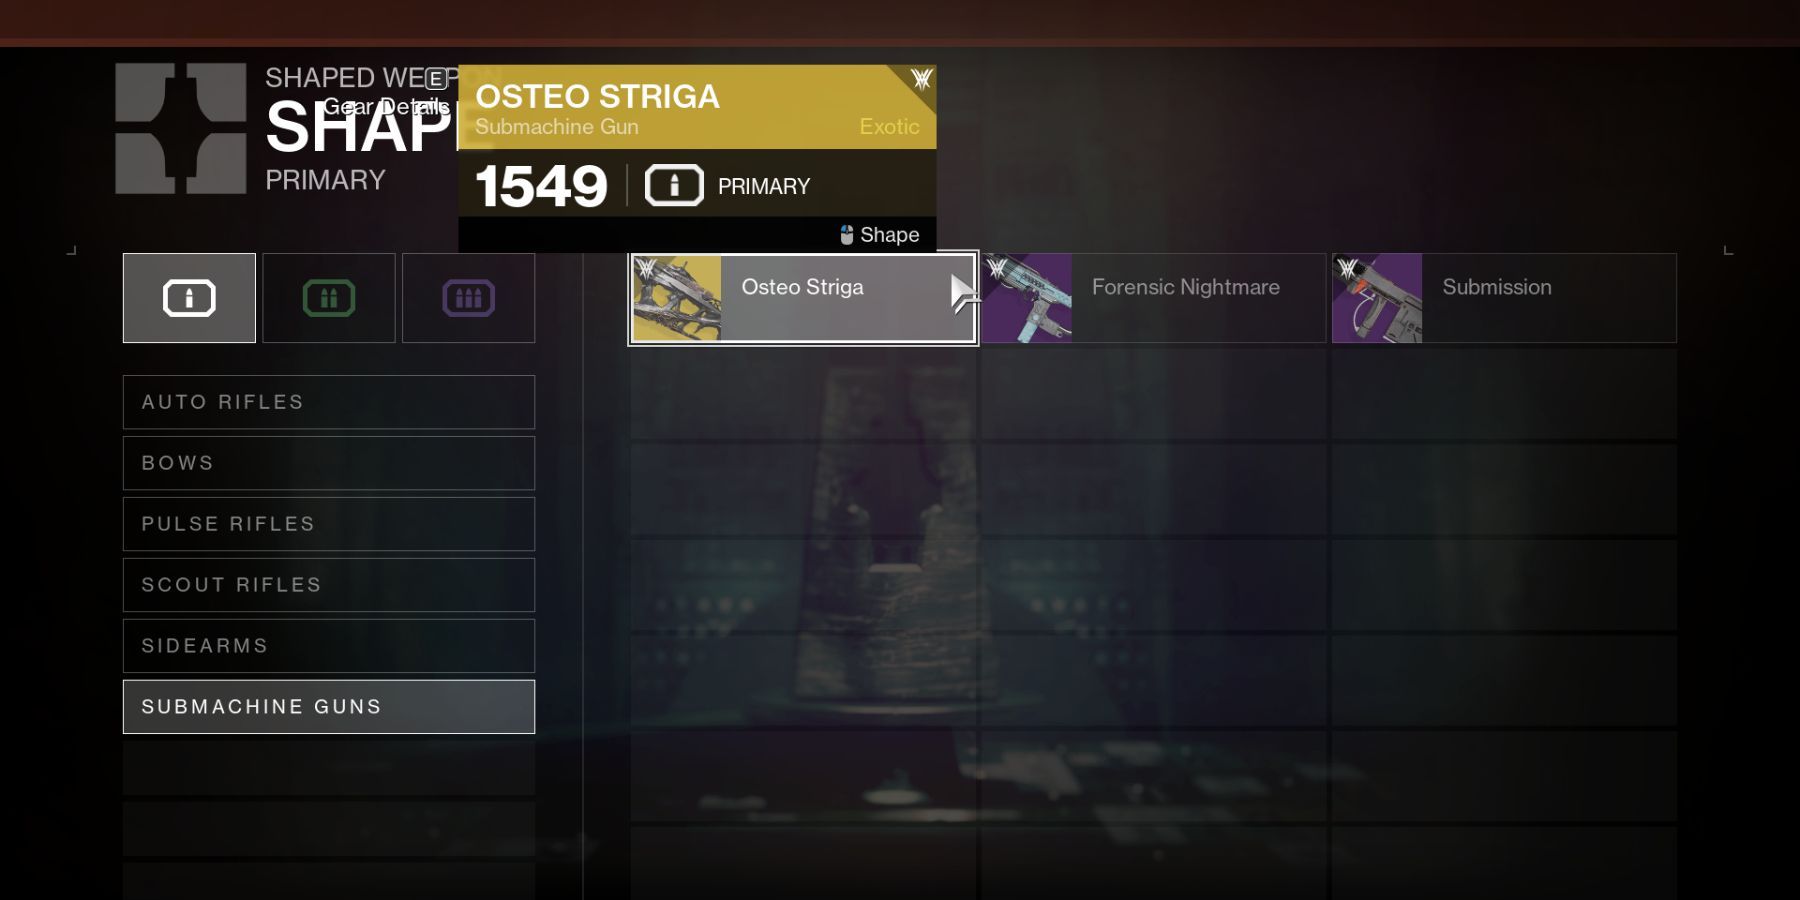 Destiny 2 The Osteo Striga In The Crafting Screen